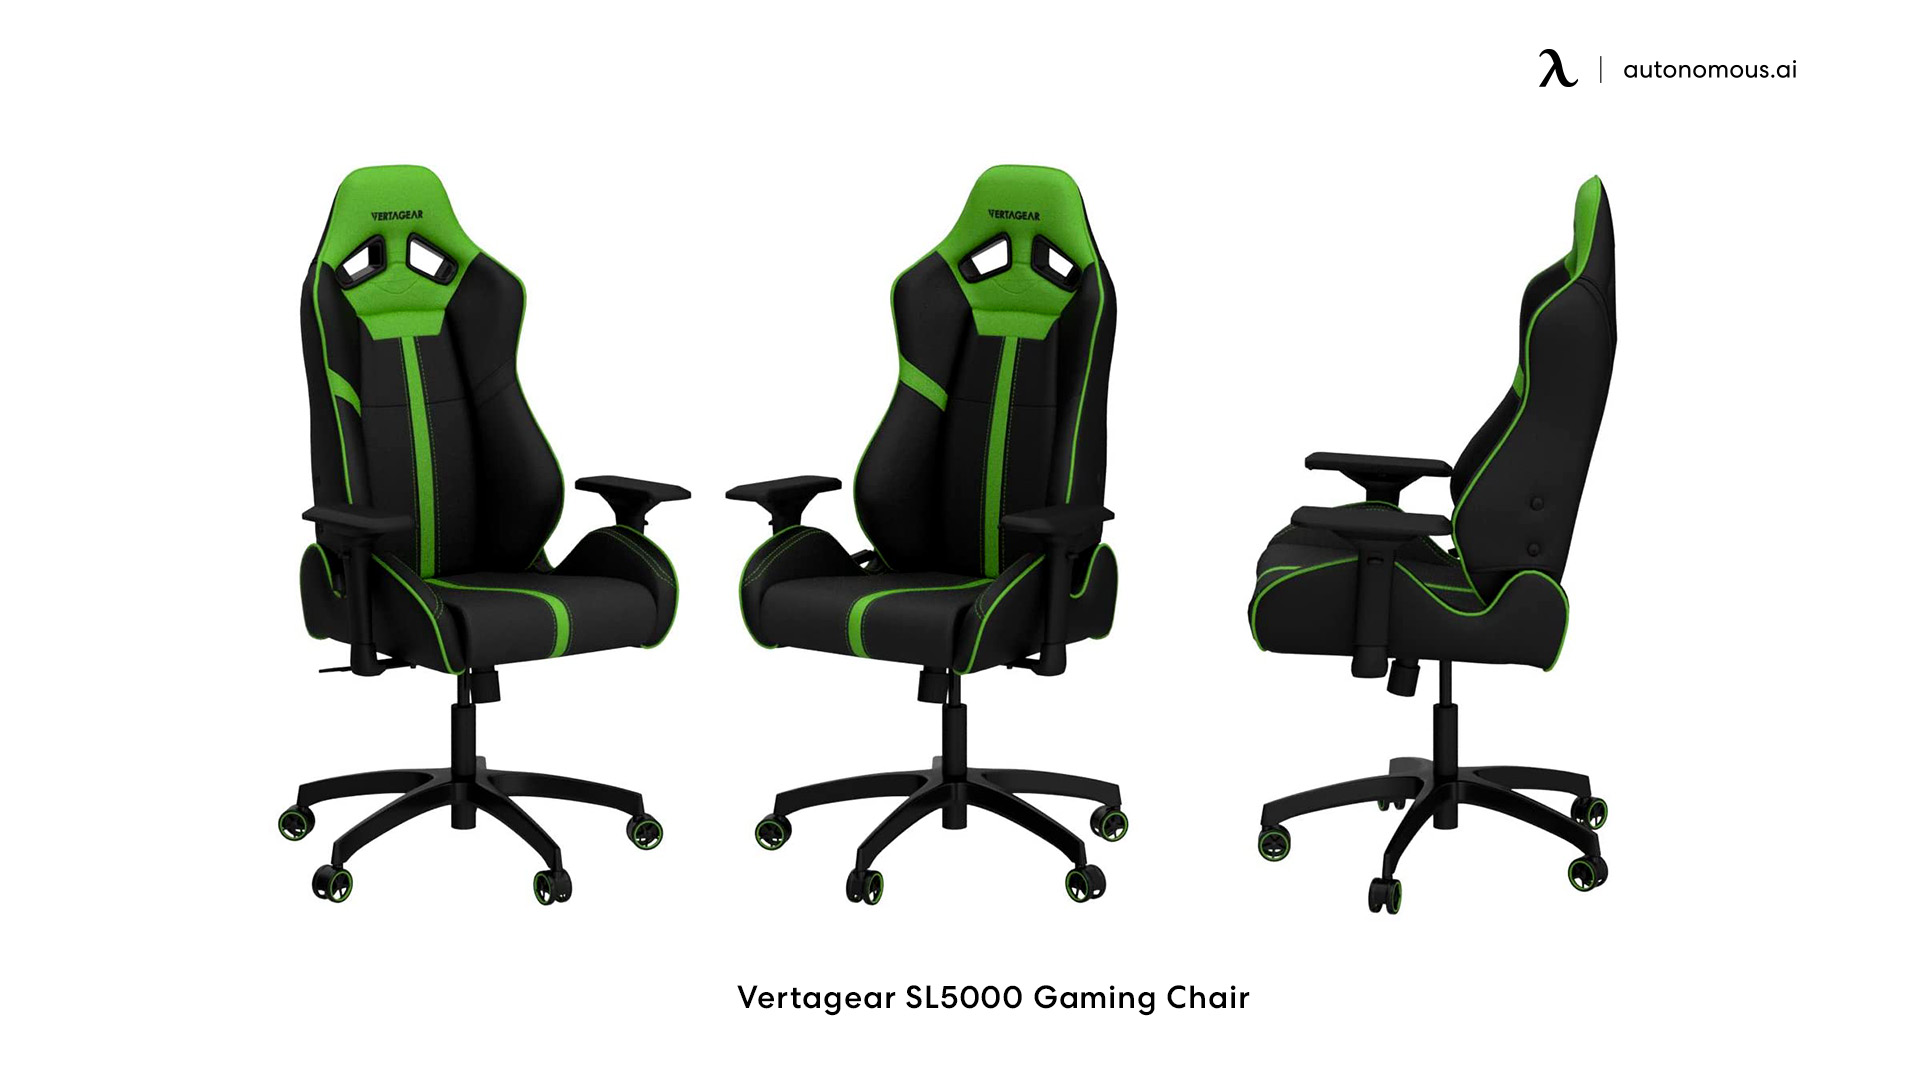 Vertagear SL5000 Rolling Gaming Chair Limited Edition